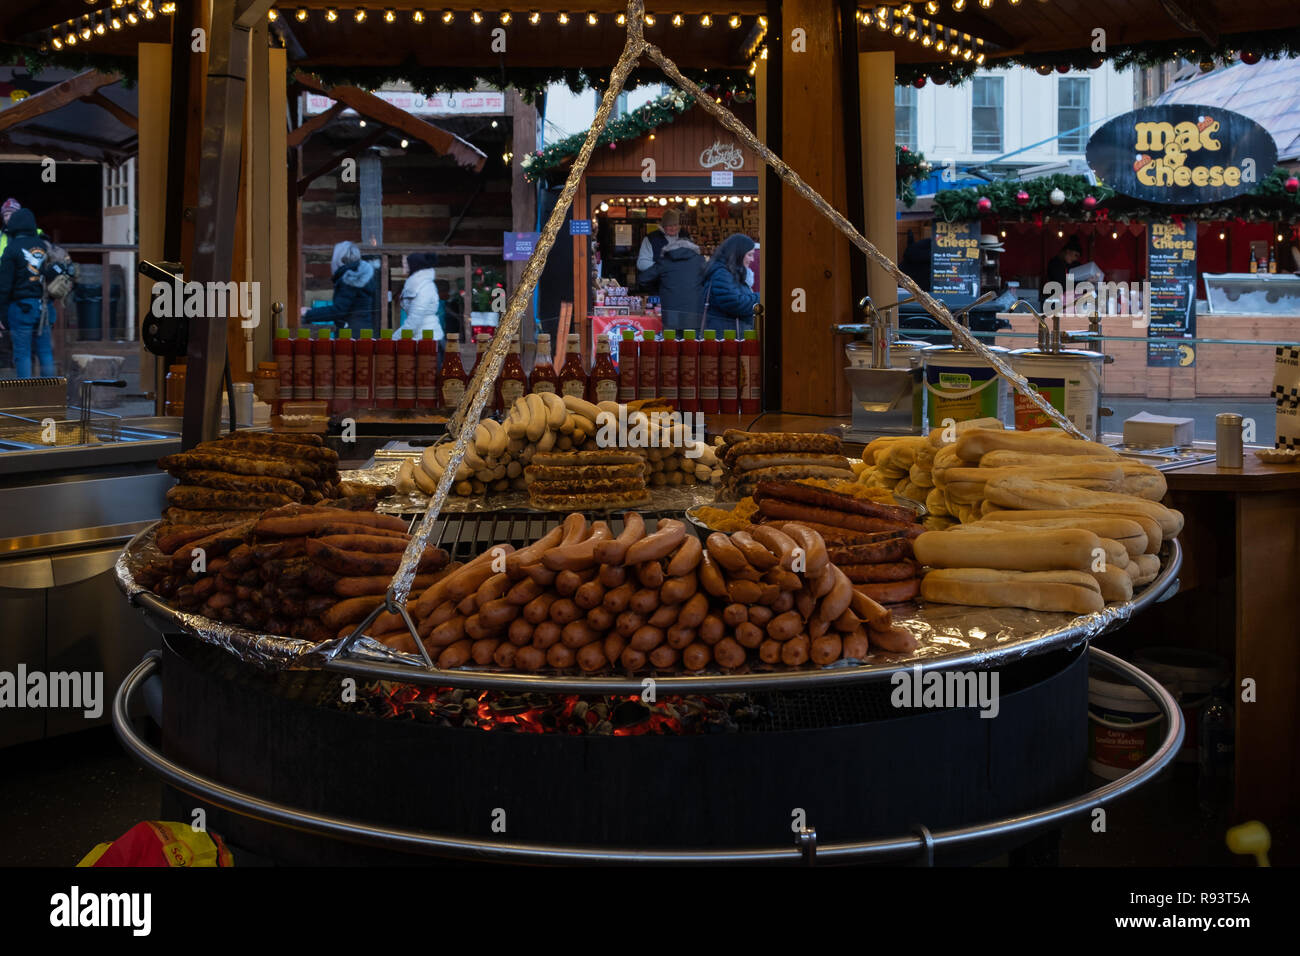 Glasgow, Scotland, UK - December 14, 2018: A giant hanging roasting pit for varied selection of cooked sausages and burgers at the Glasgow Christmas f Stock Photo